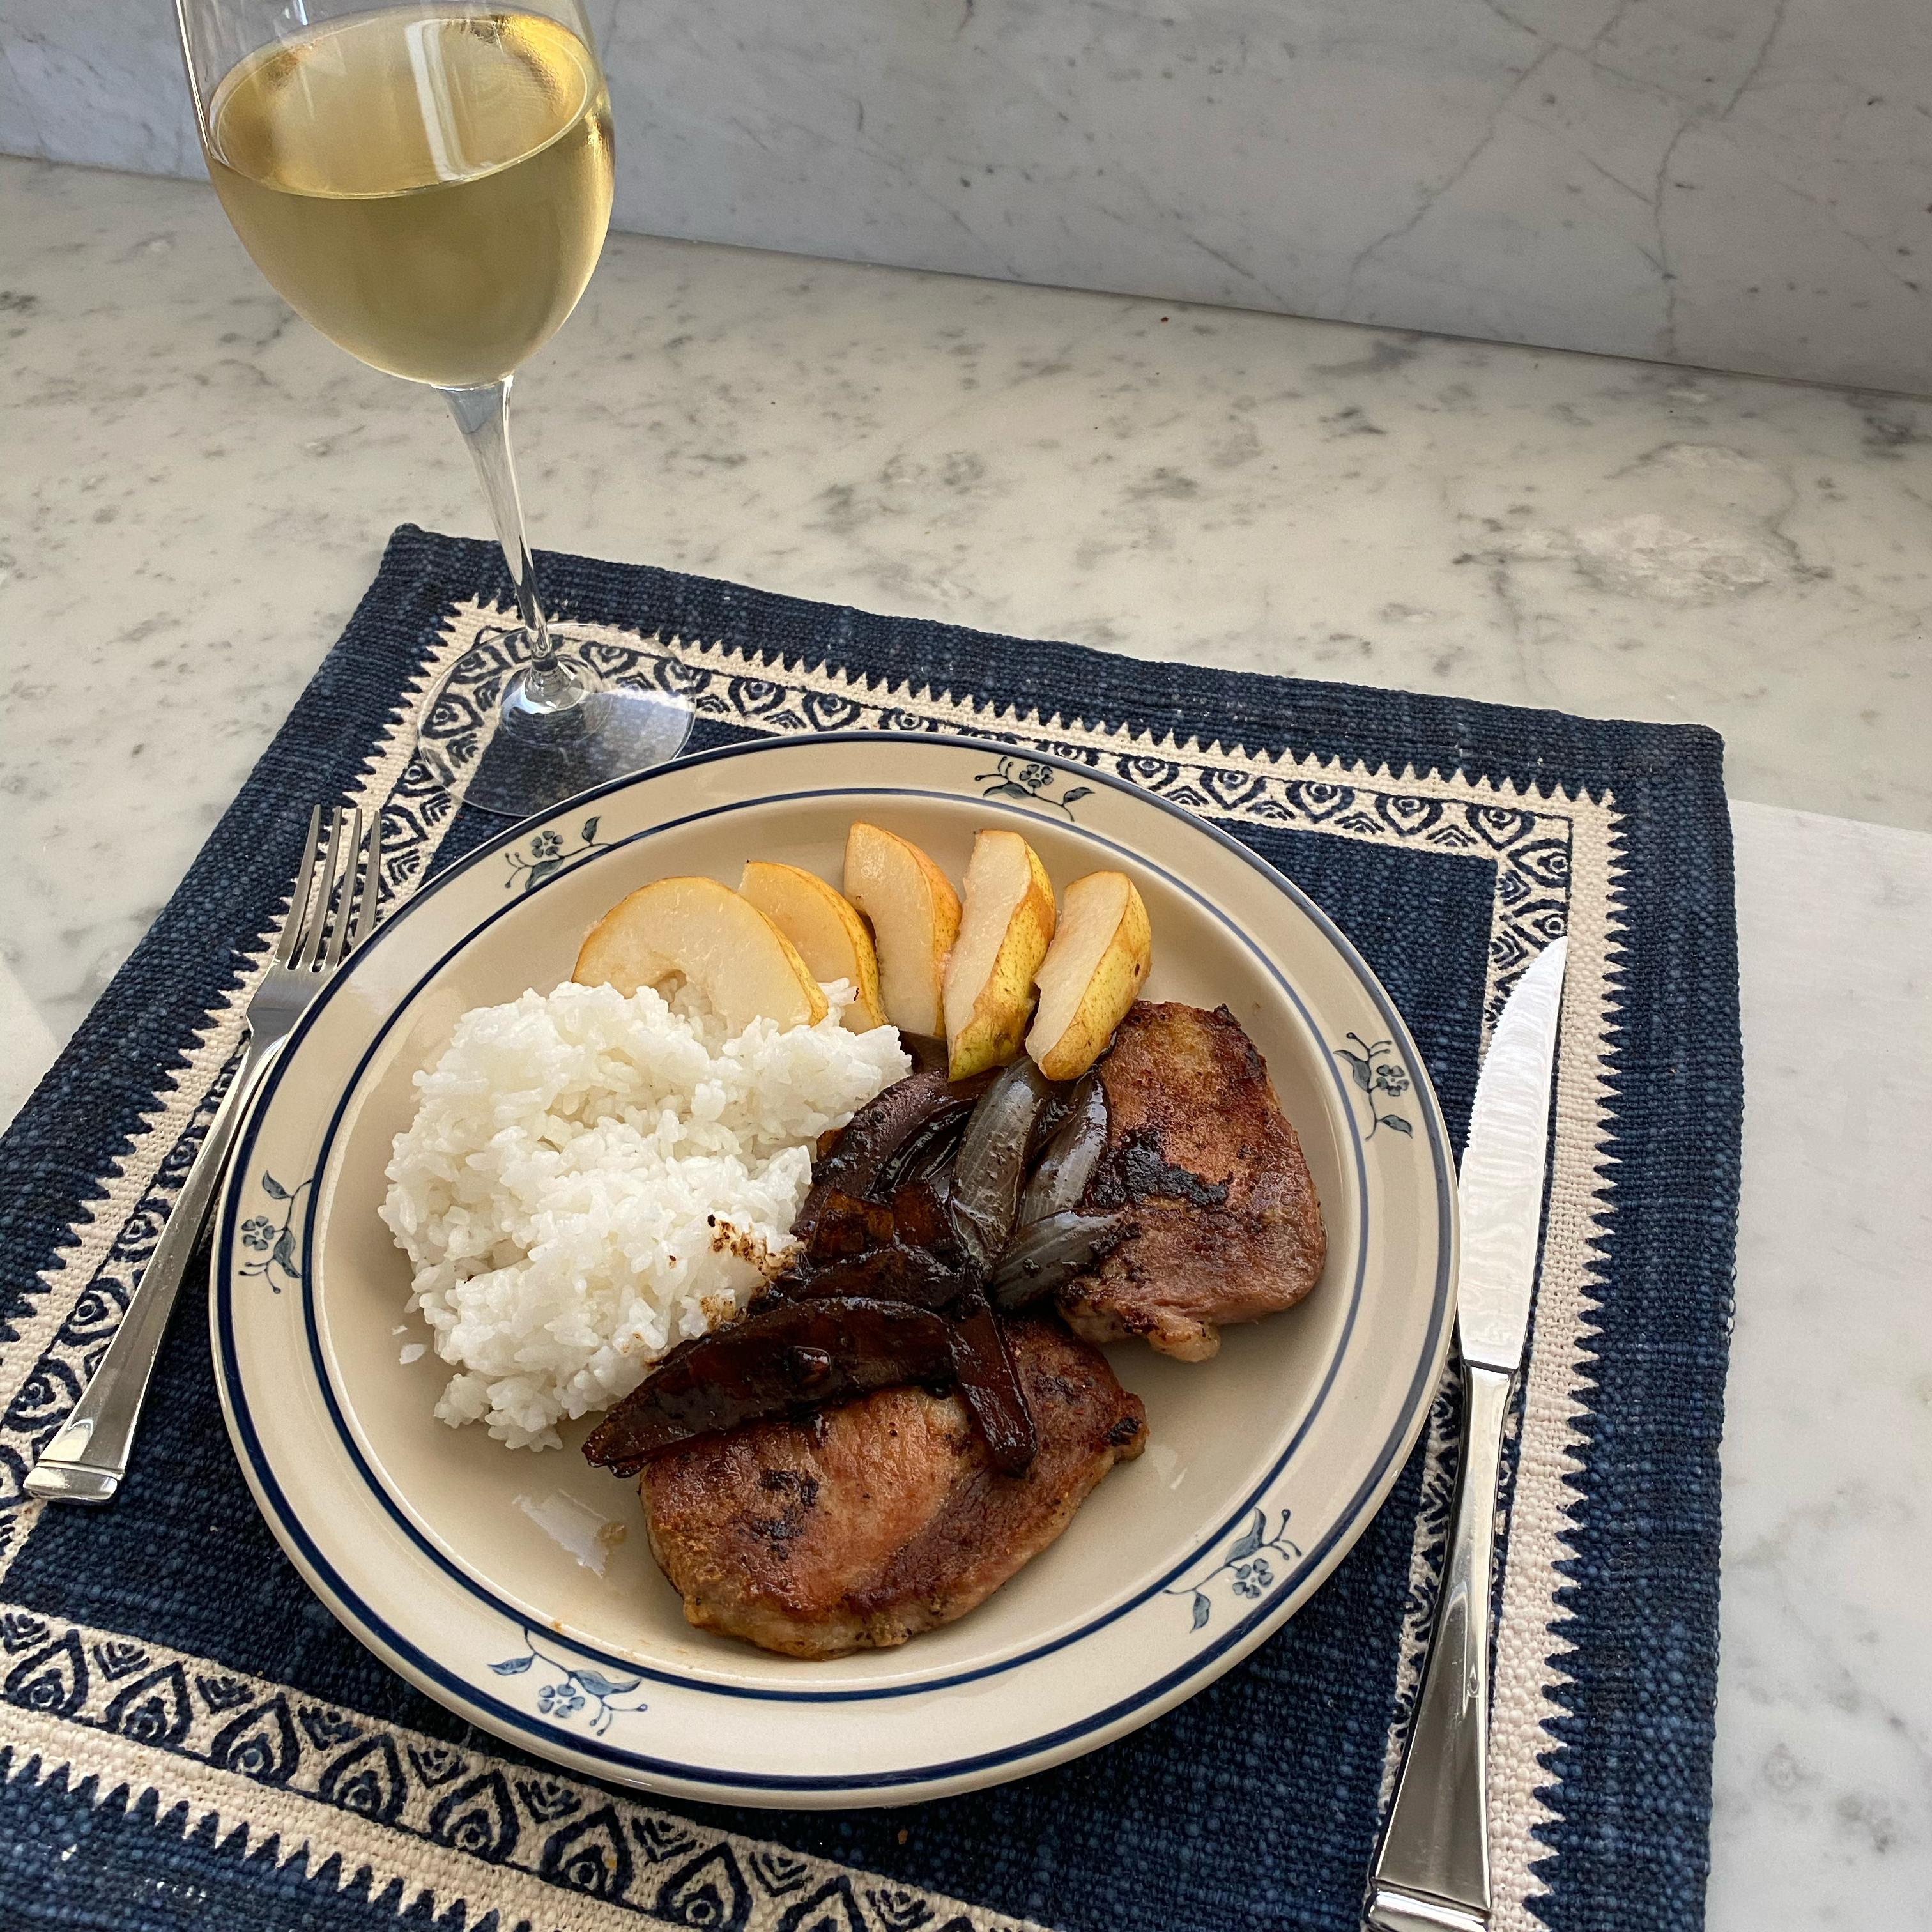 Grilled Pork Chops with Balsamic Caramelized Pears Laura Landeros Cook